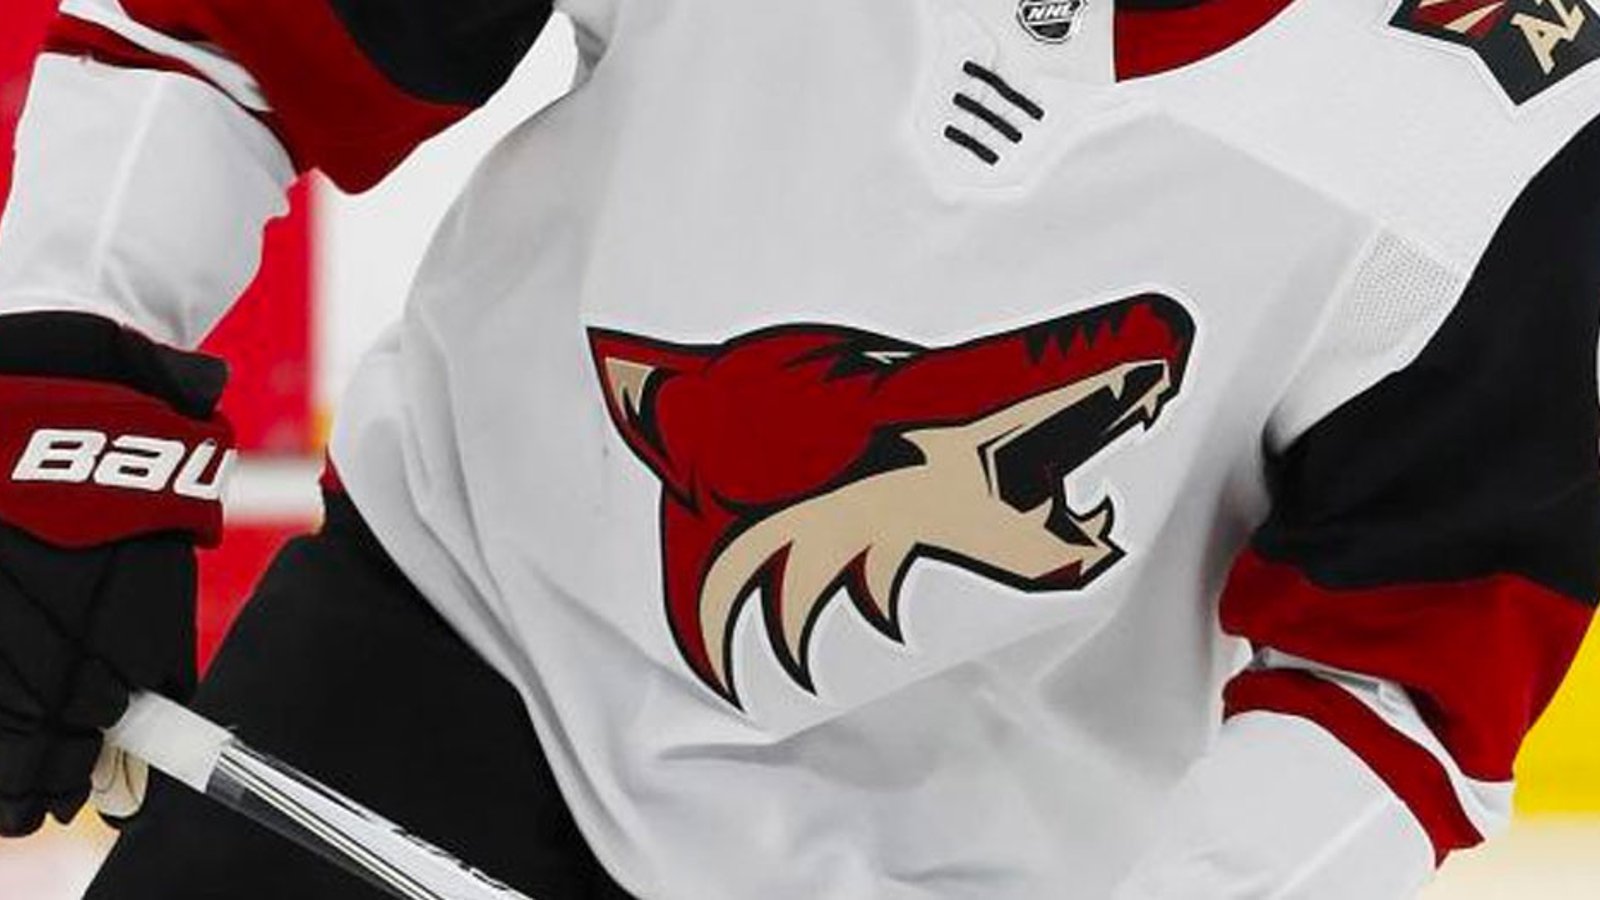 Rumor: More inside reports that the Coyotes are done in Arizona